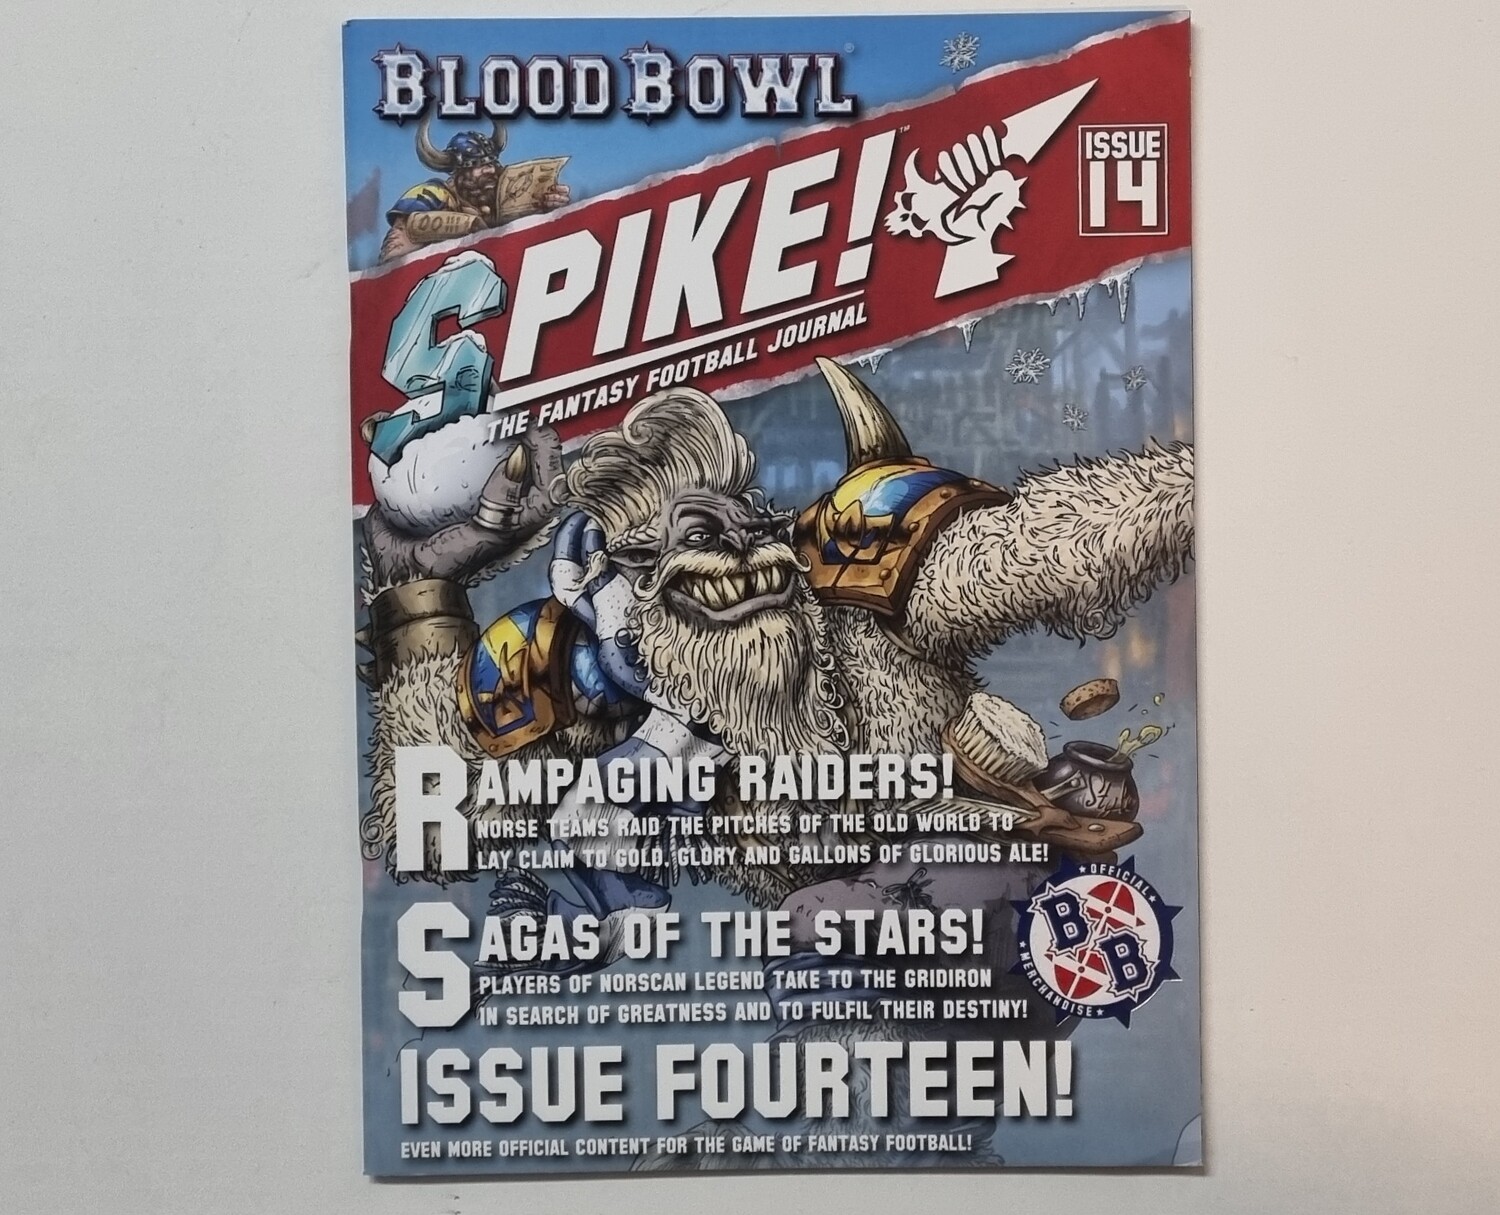 Warhammer, Blood Bowl, Spike, The Fantasy Football Journal, issue 14